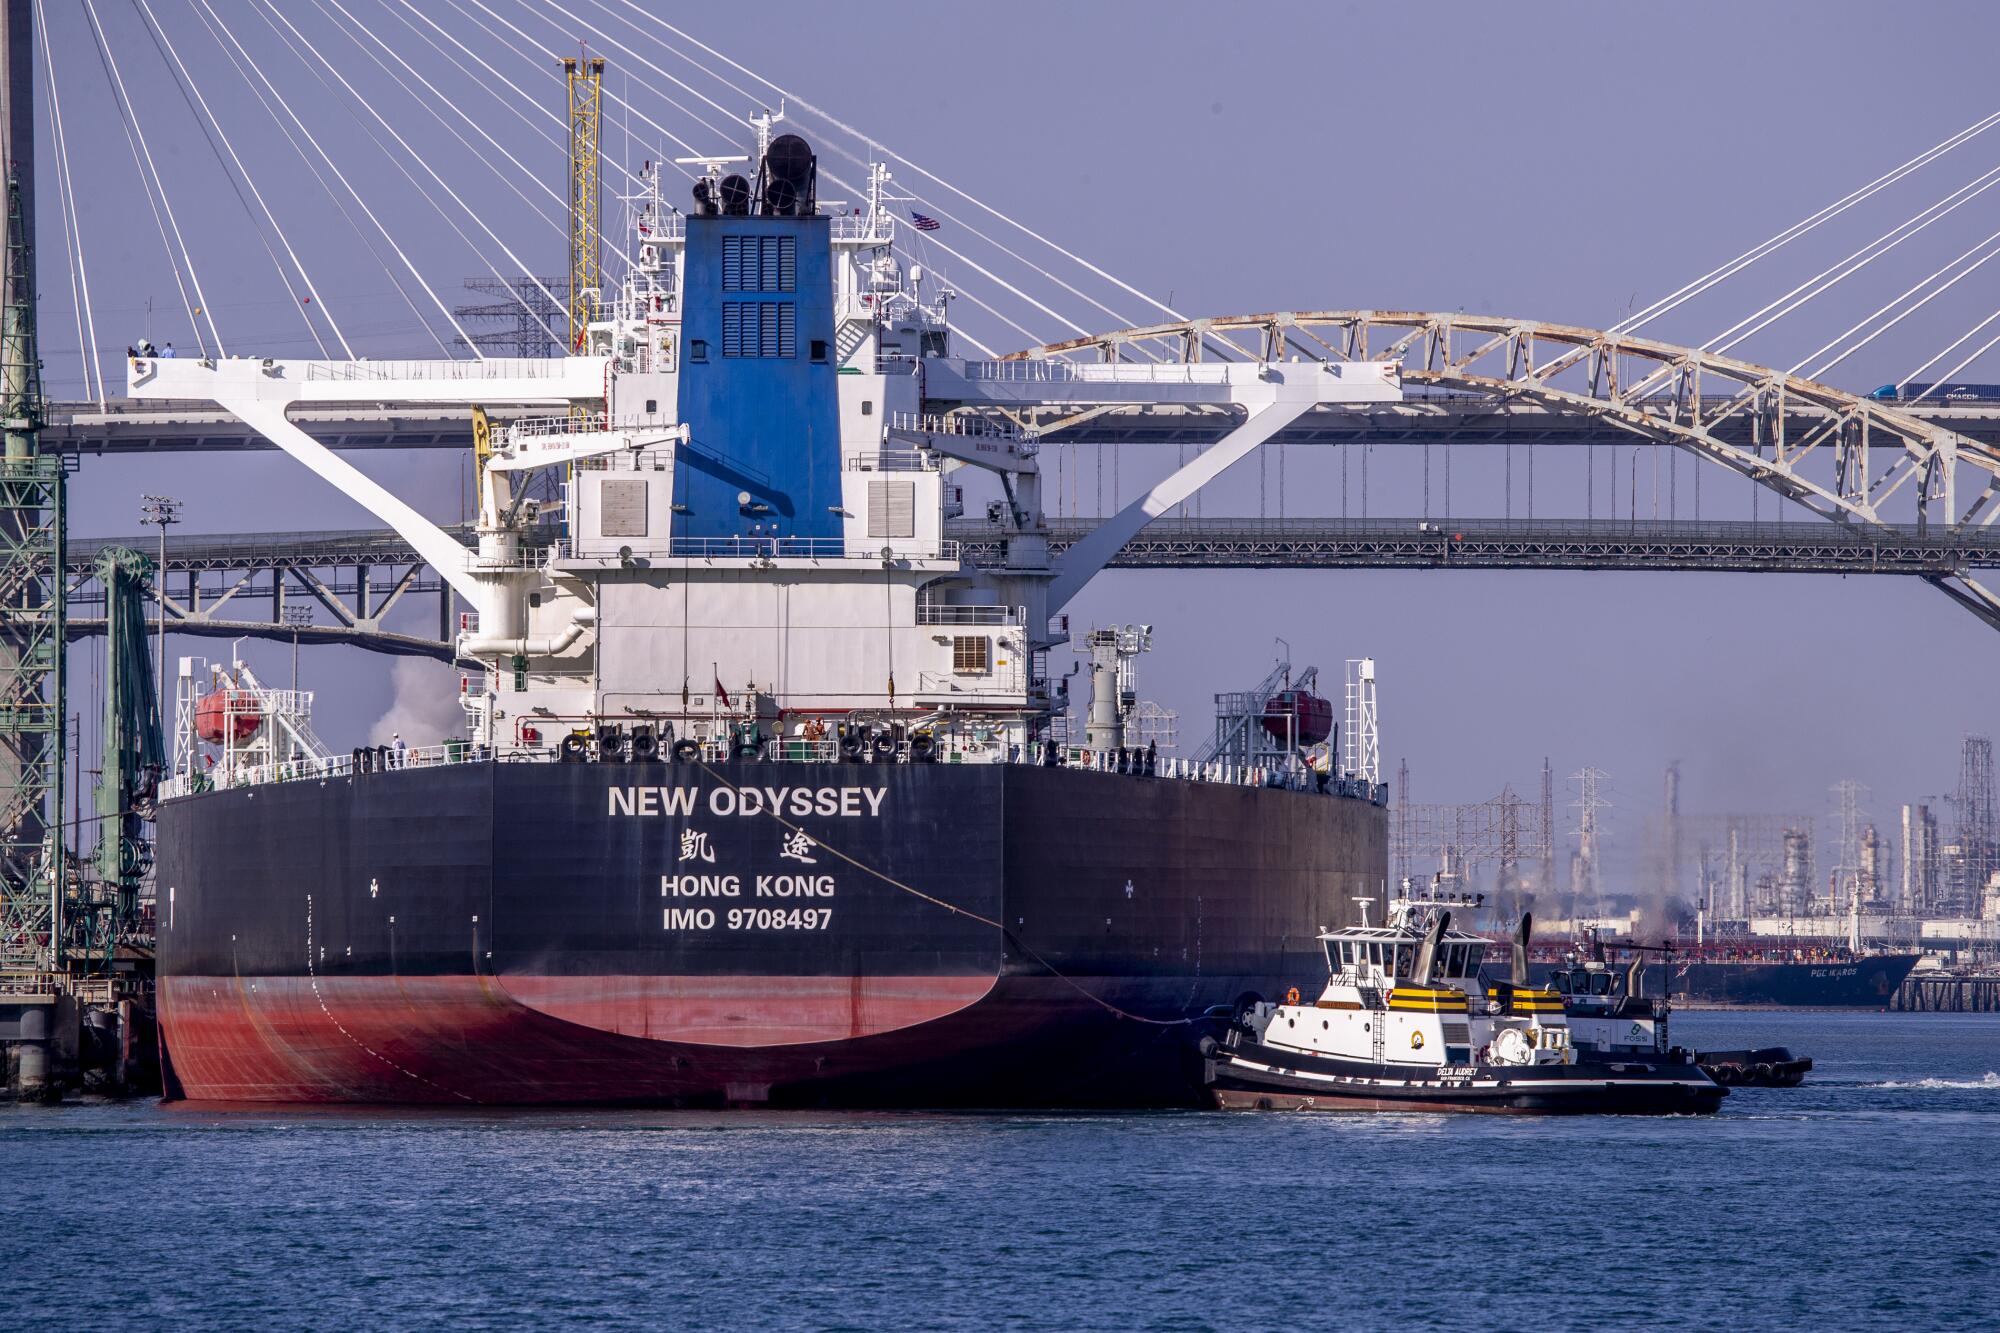 Tugboat Delta Audrey begins to pull the supertanker from Pier 121 in the Port of Long Beach out to sea.